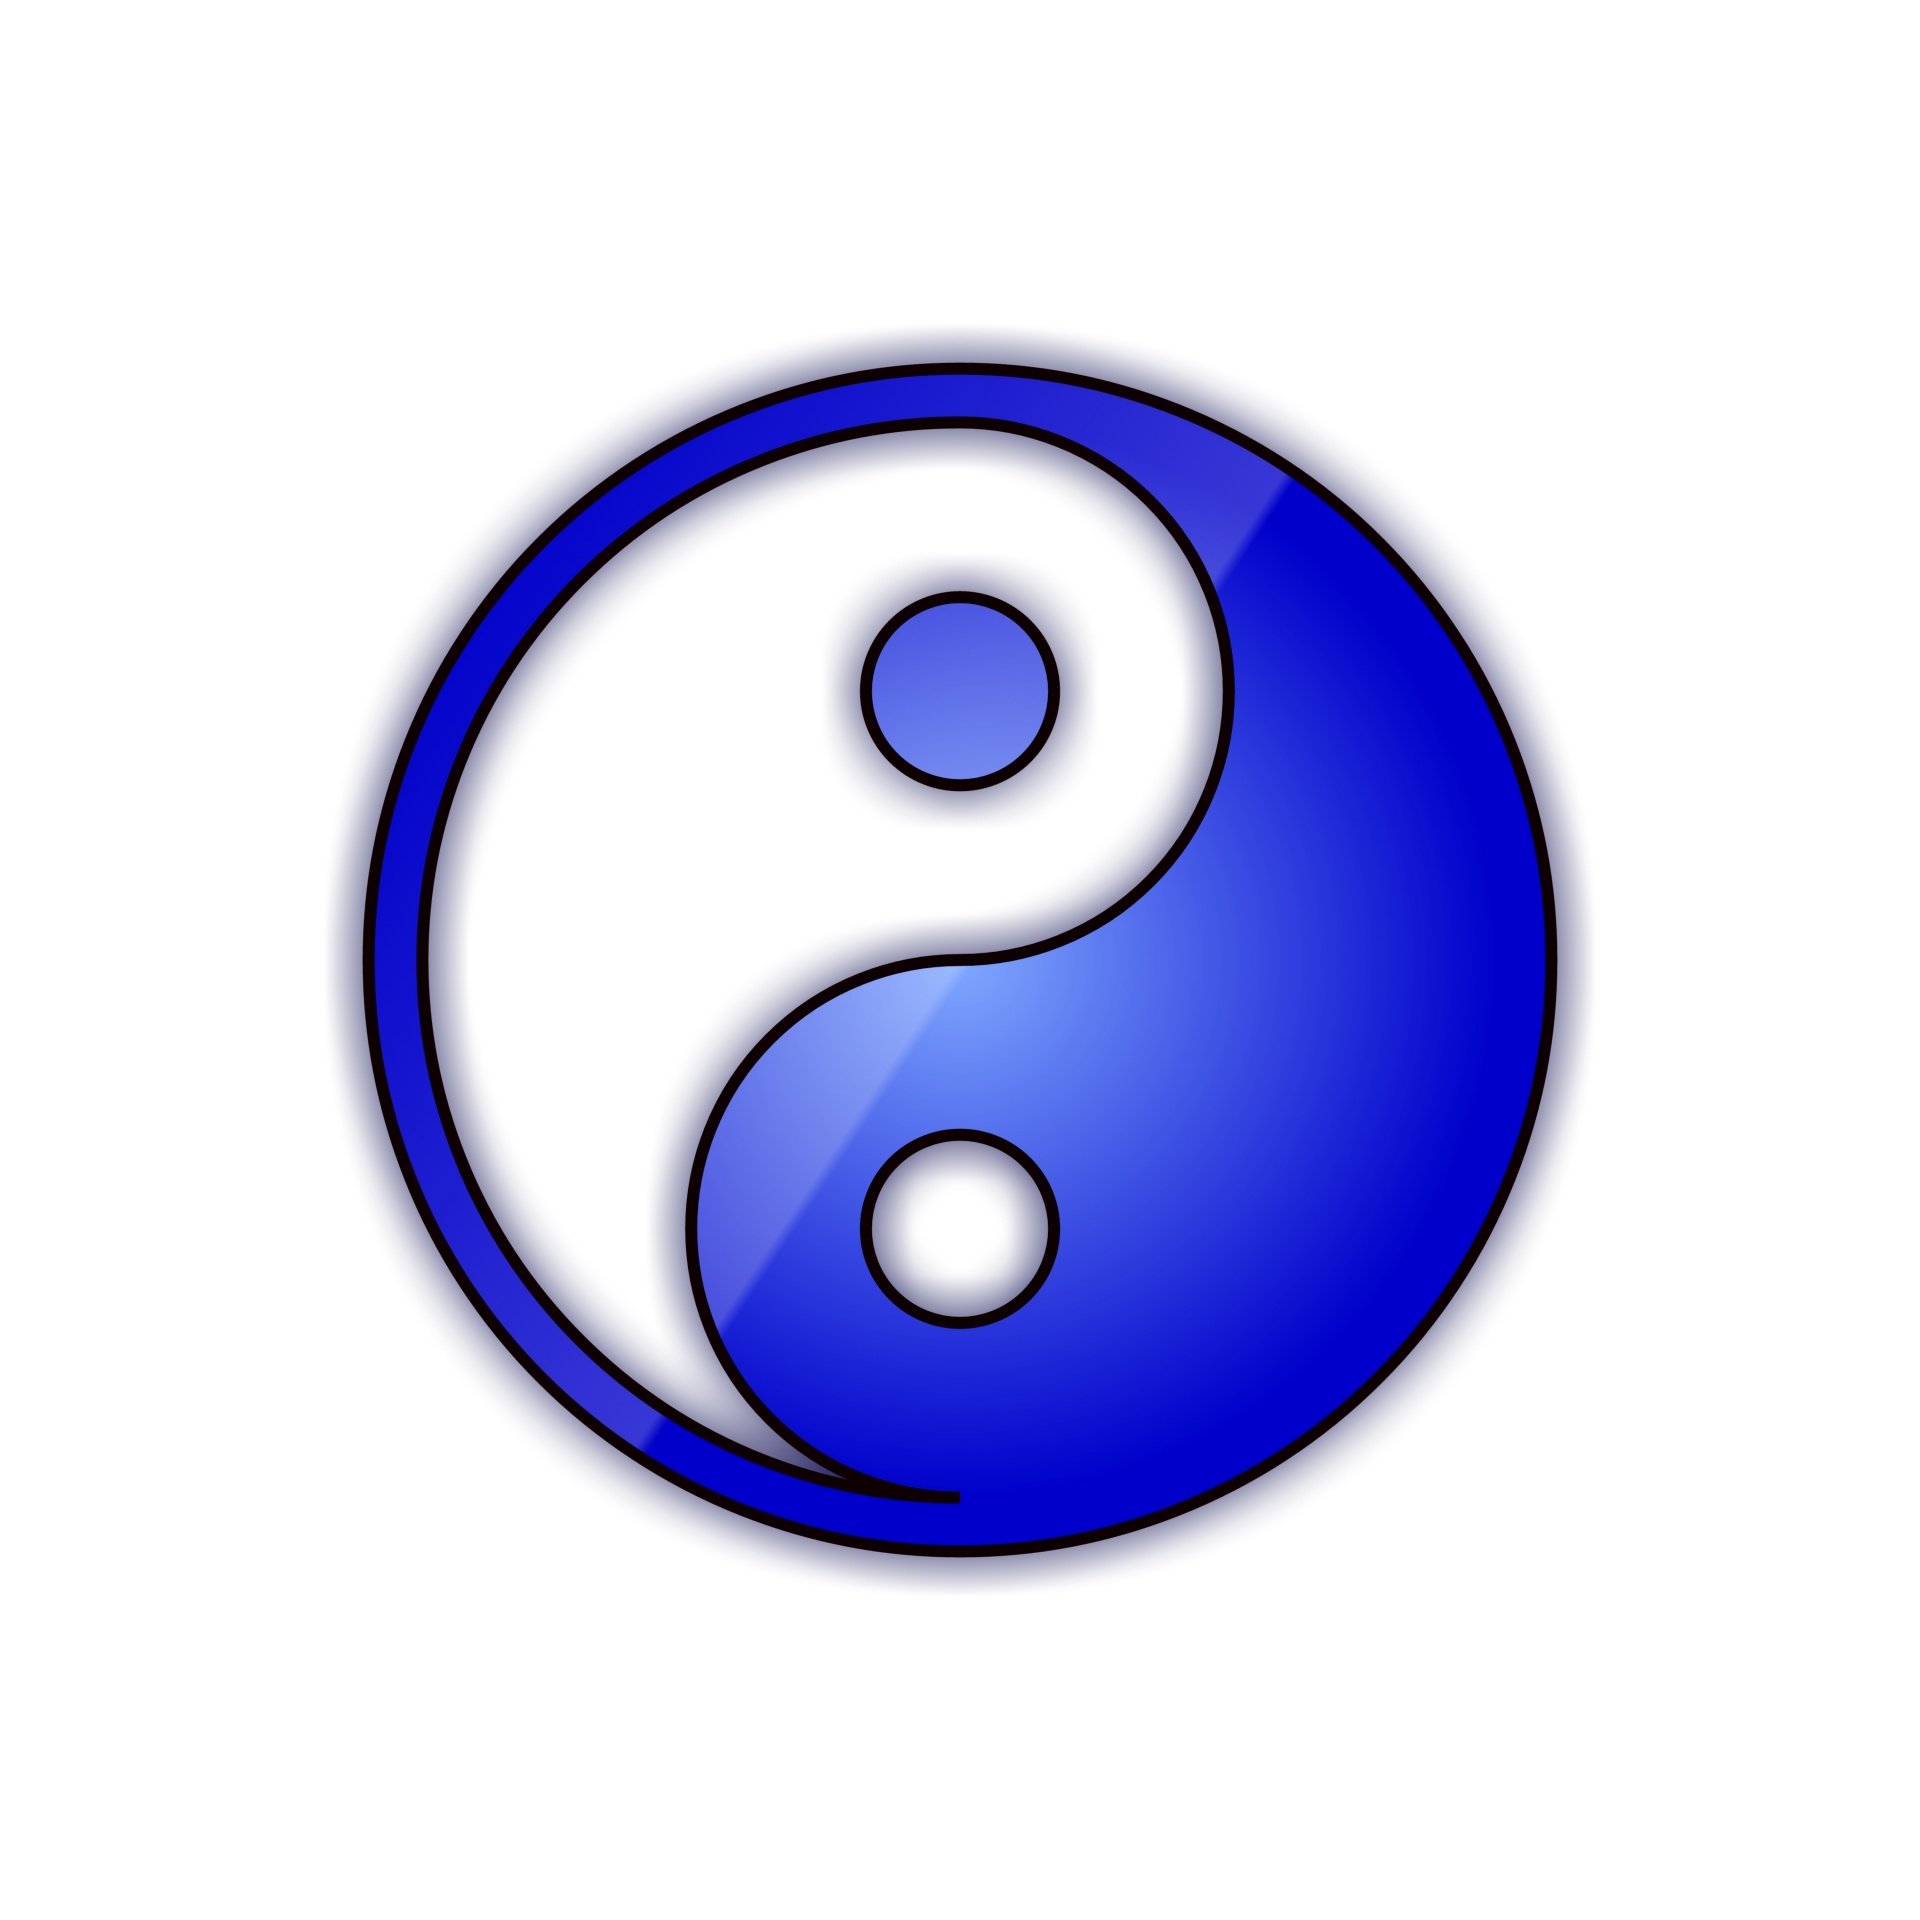 Blue Color Yin Yang Sign Free Image From Needpix Com